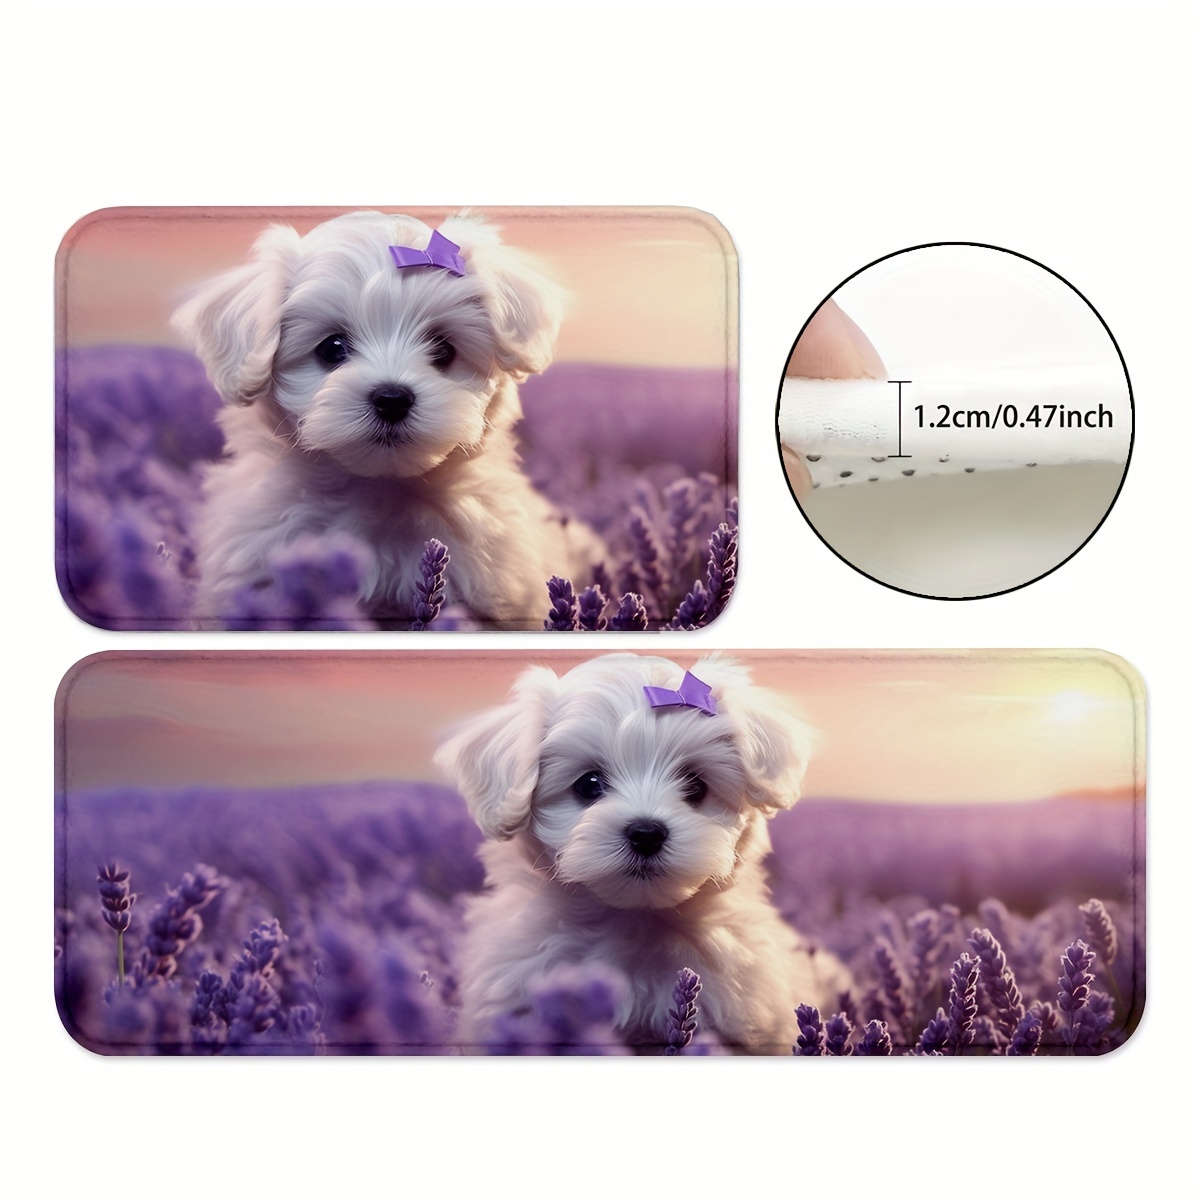 

1/2pcs, Vintage Dog, Lavender Kitchen Mats, Non-slip And Durable Bathroom Pads, Comfortable Standing Runner Rugs, Carpets For Kitchen, Home, Office, Sink, Laundry Room, Bathroom, Spring Decor